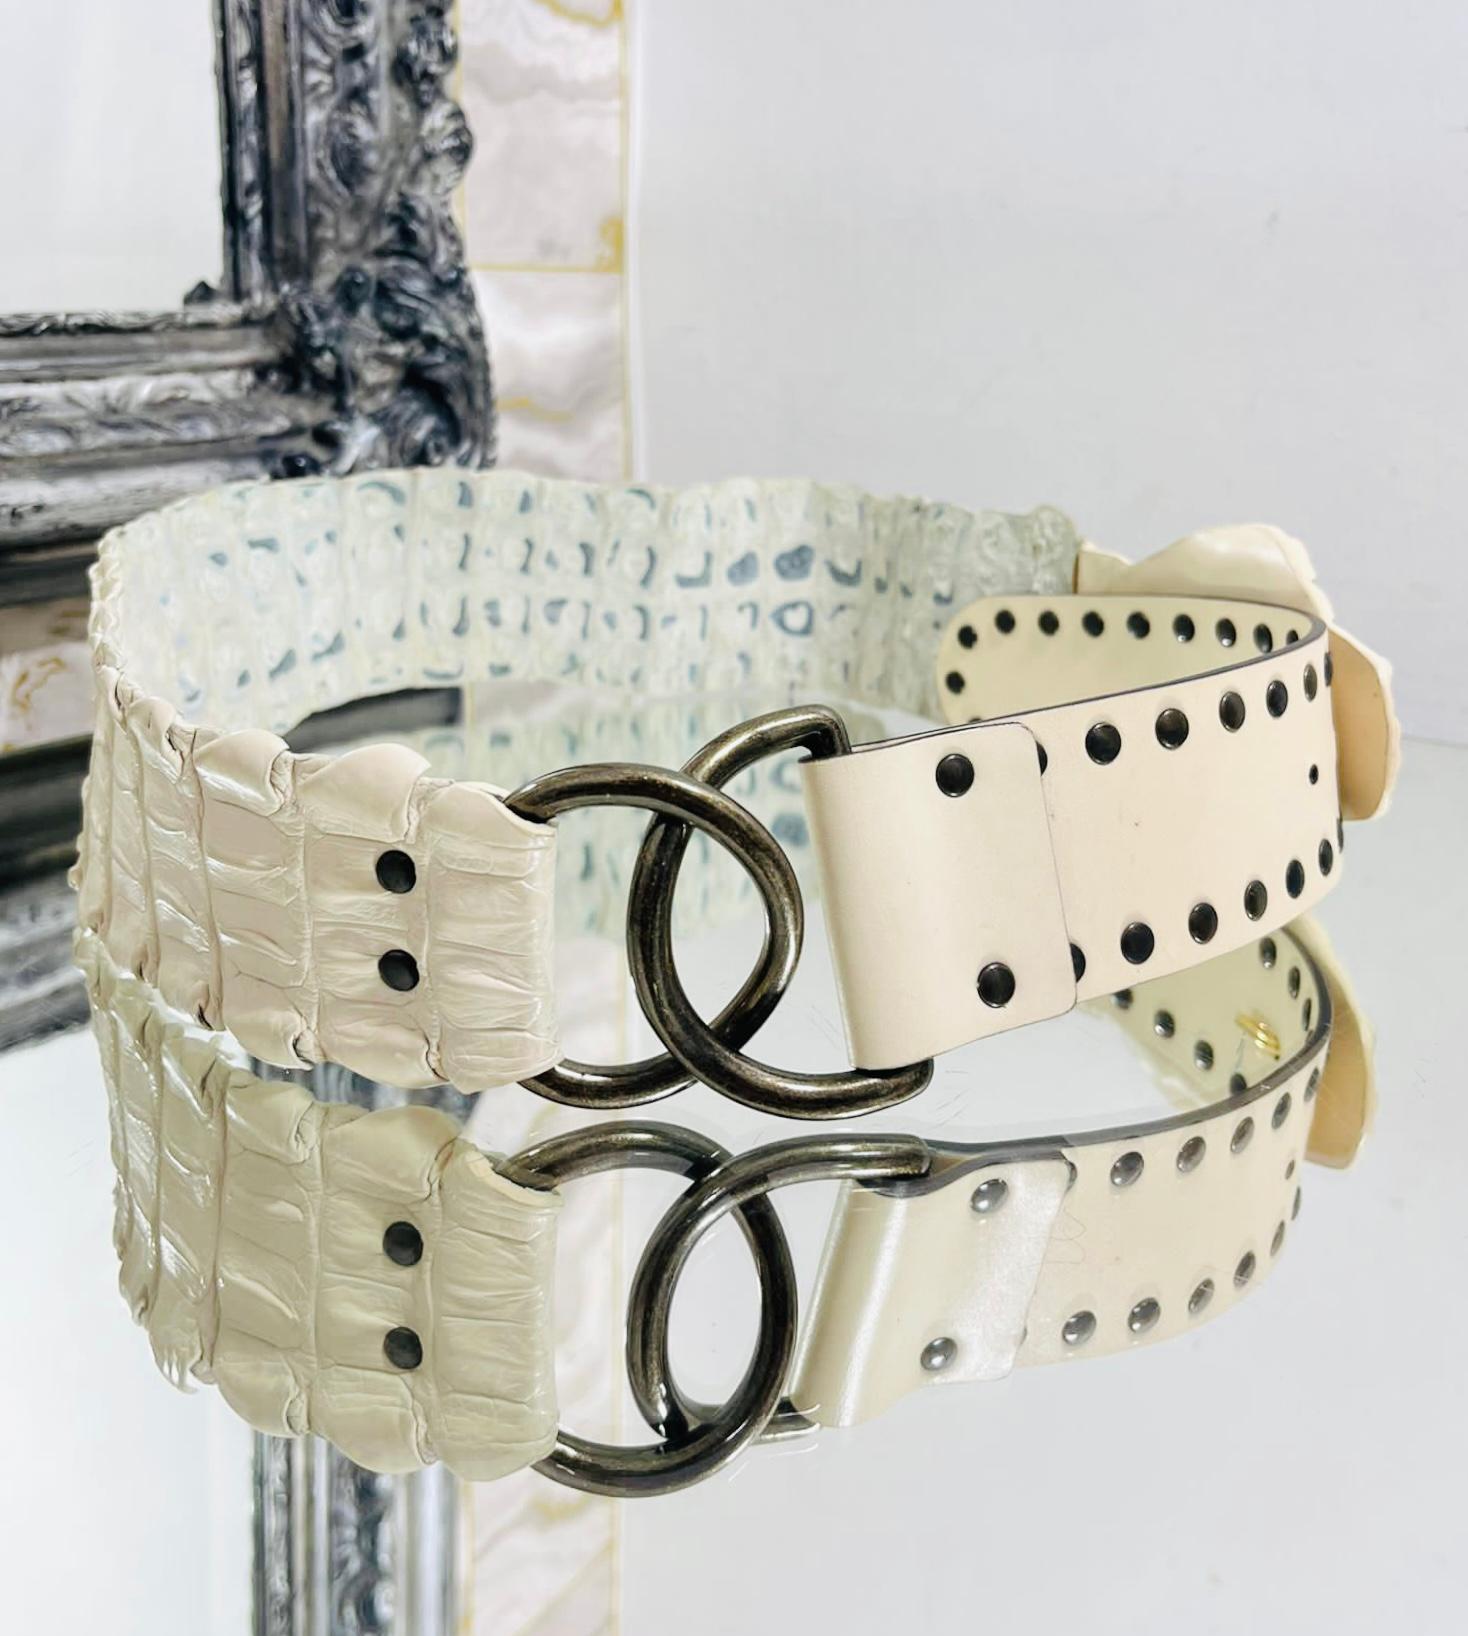 White Alligator Exotic Leather Buckle Belt

Wide belt fully crafted from Caiman tail and detailed with aged brass buckle.

Featuring smooth leather part embellished with jets.

Size – 100cm

Condition – Very Good (Created to look worn, raw skin and